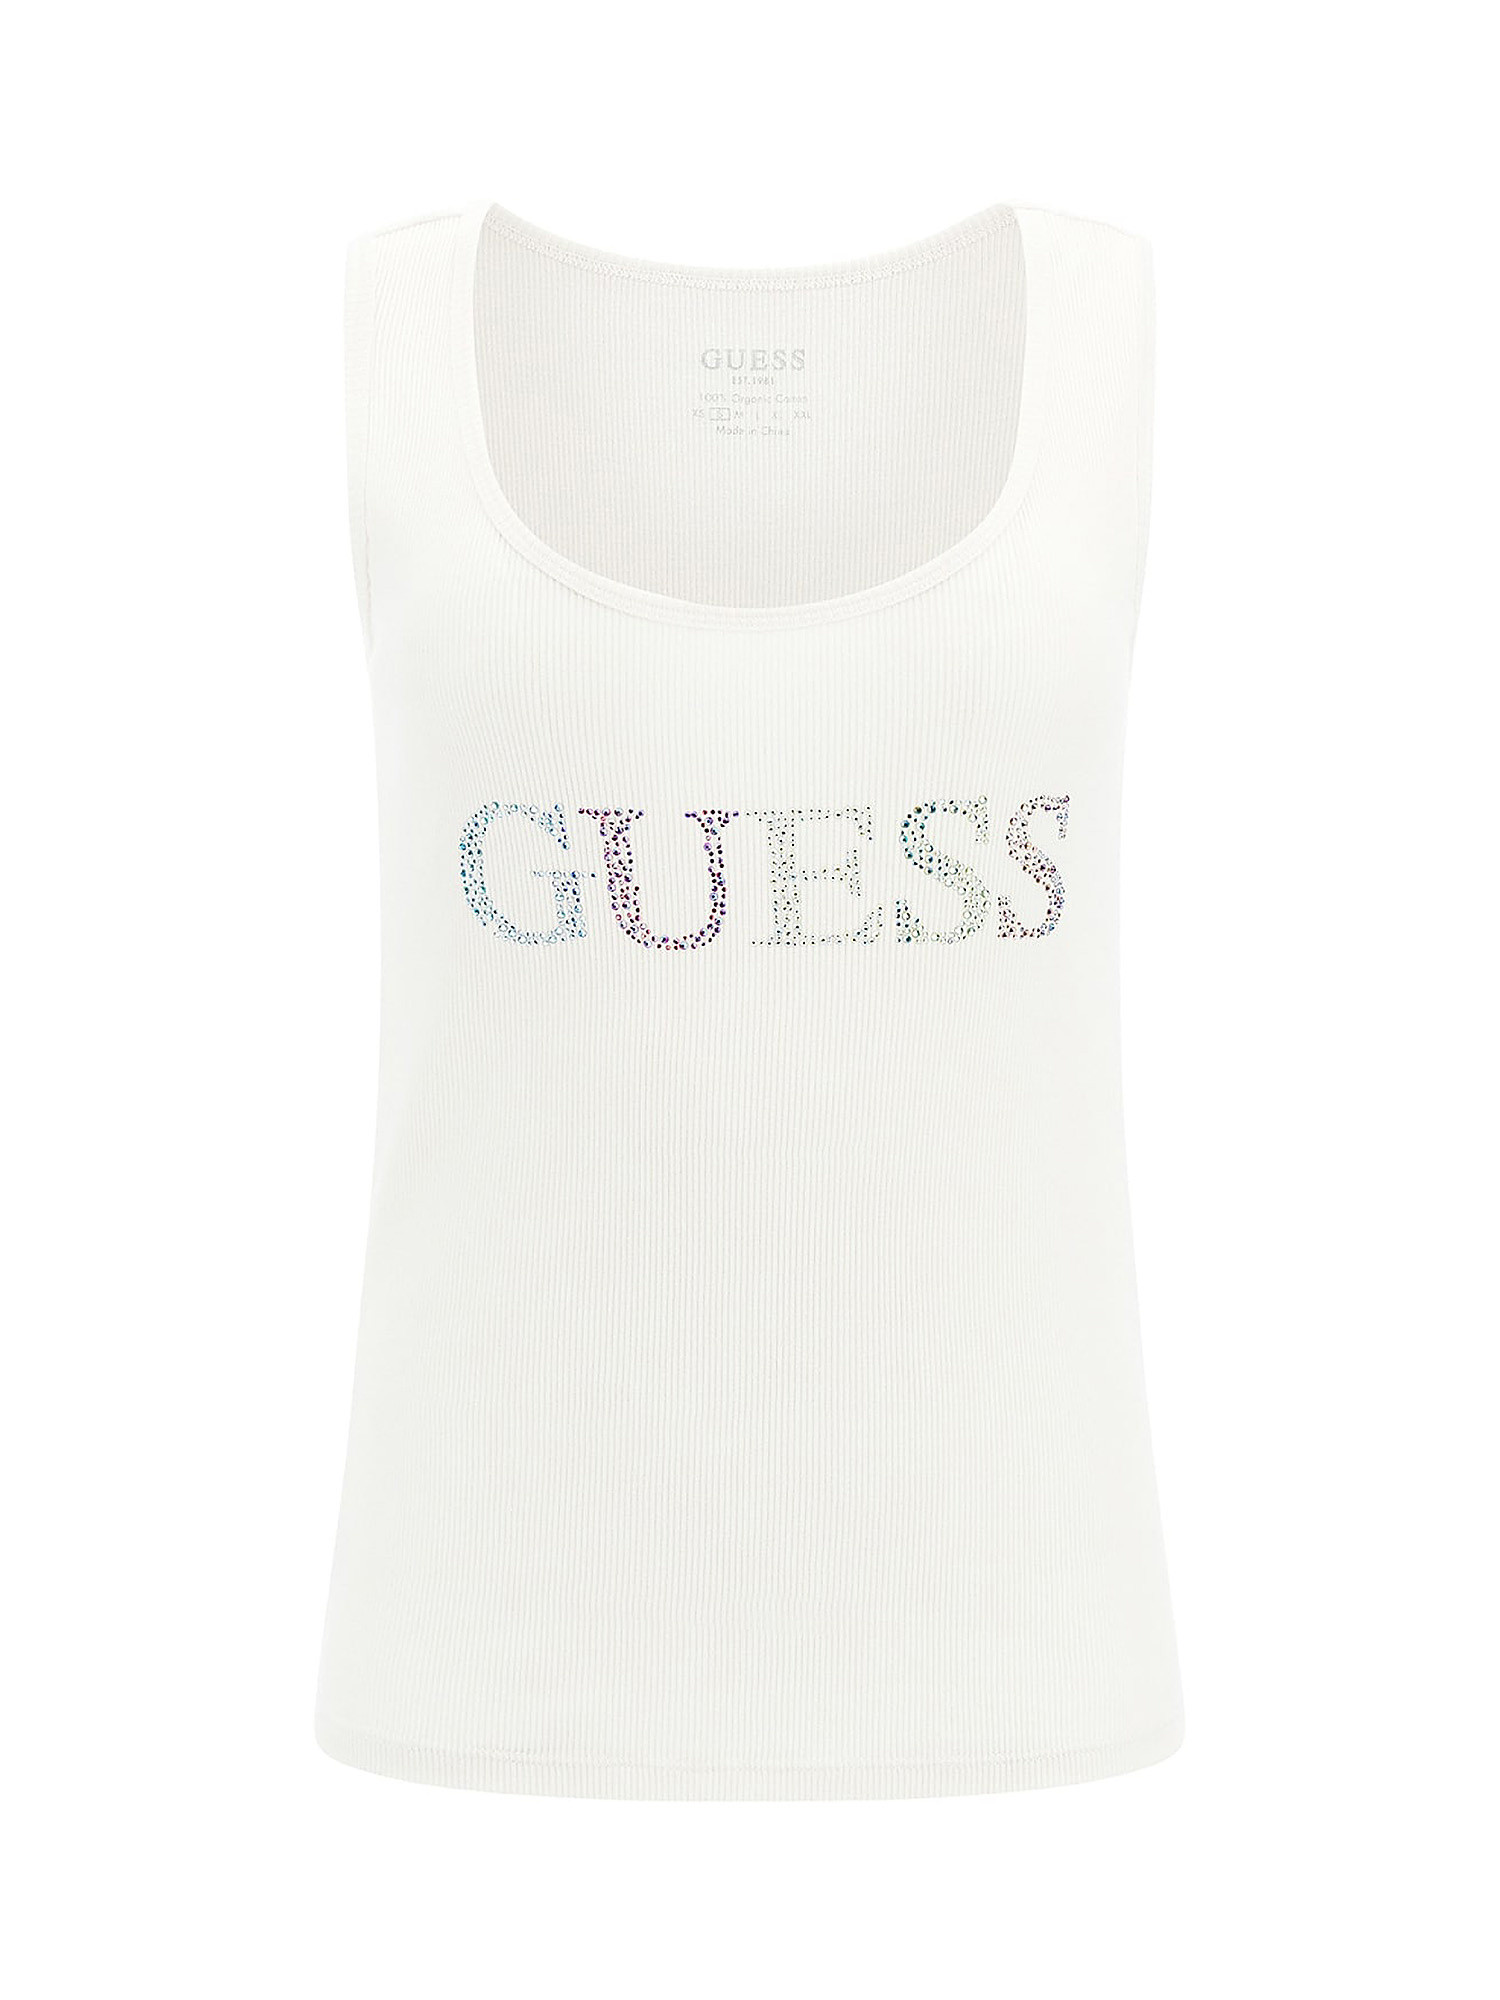 GUESS - Canotta in cotone con logo, Bianco, large image number 0